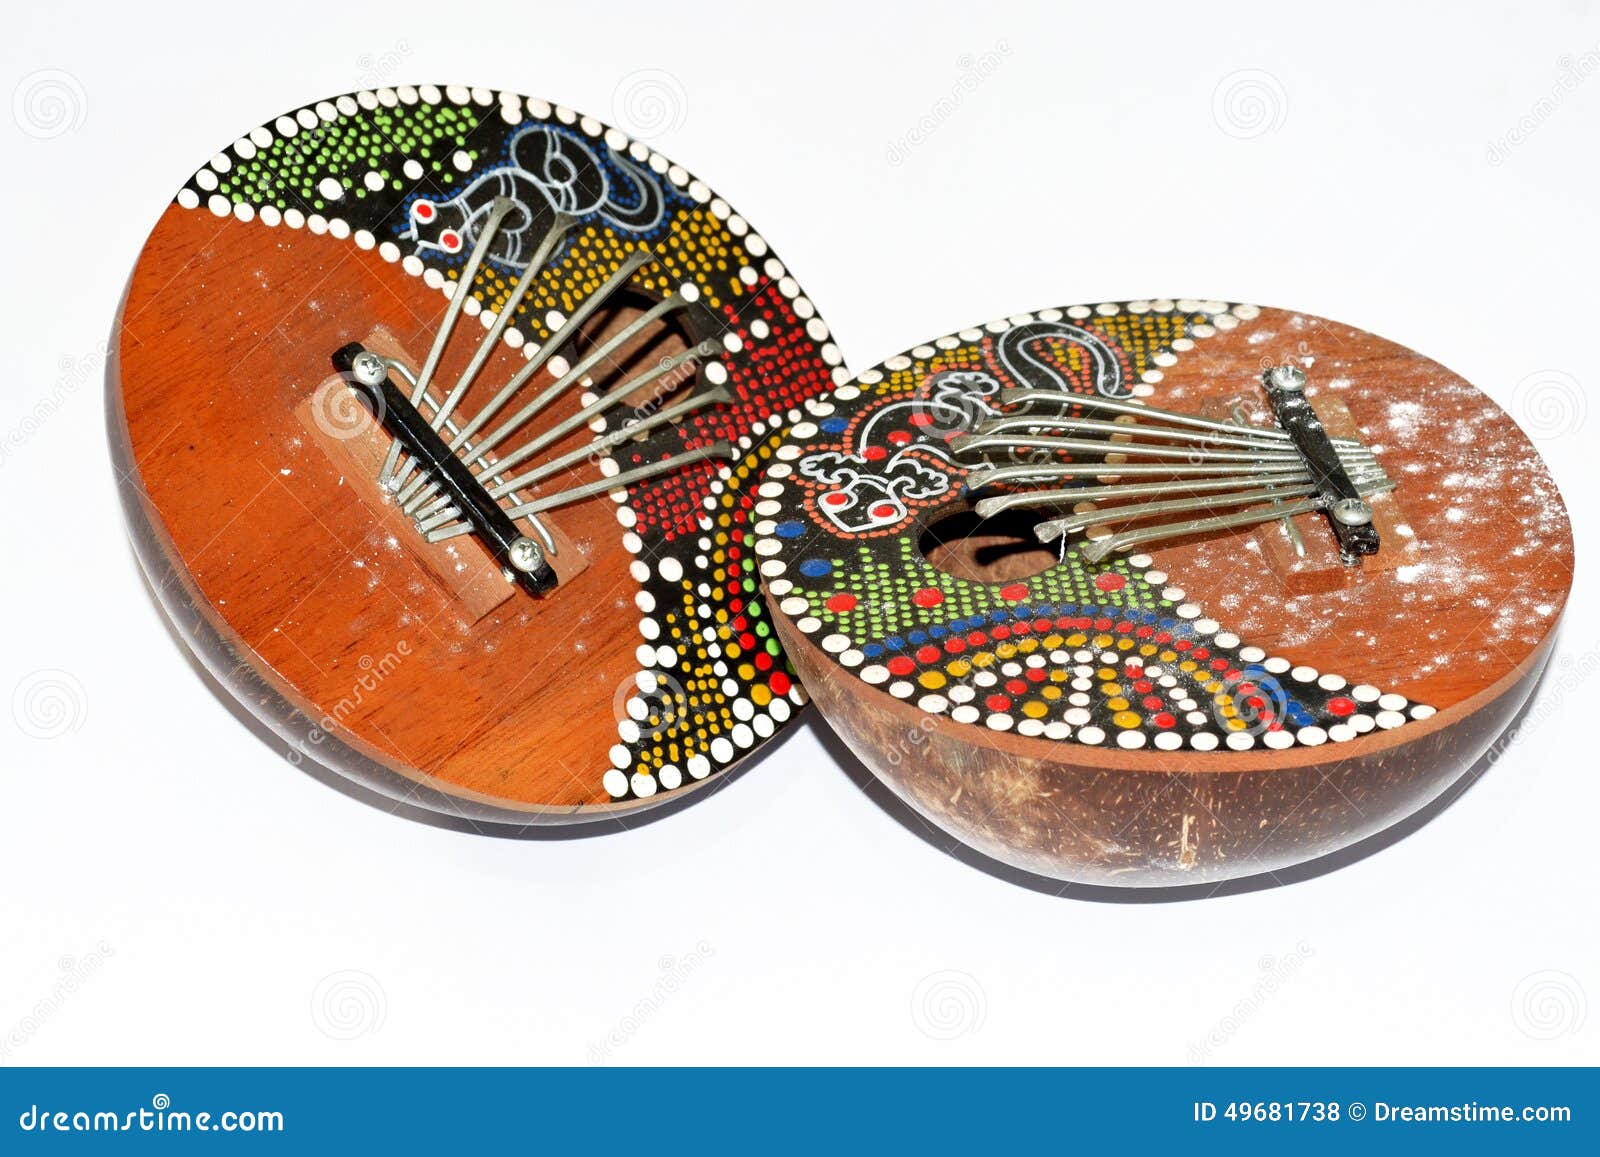  Bali  Jamaican Instrument  stock photo Image of traditional 